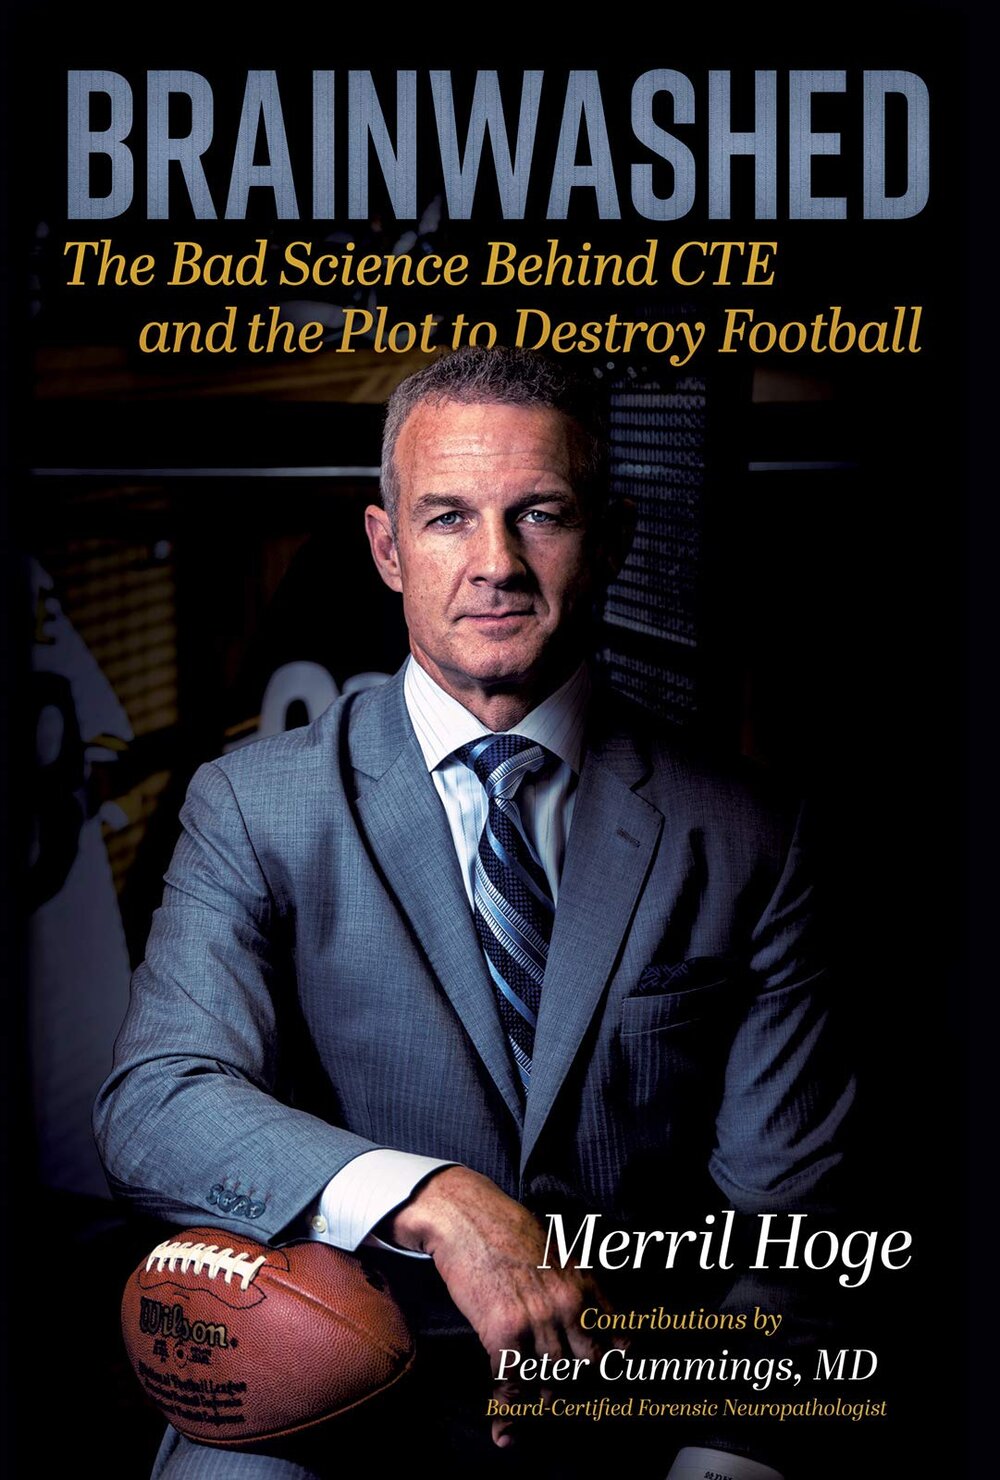 Brainwashed: The Bad Science Behind CTE and the Plot to Destroy Football by Merril Hoge